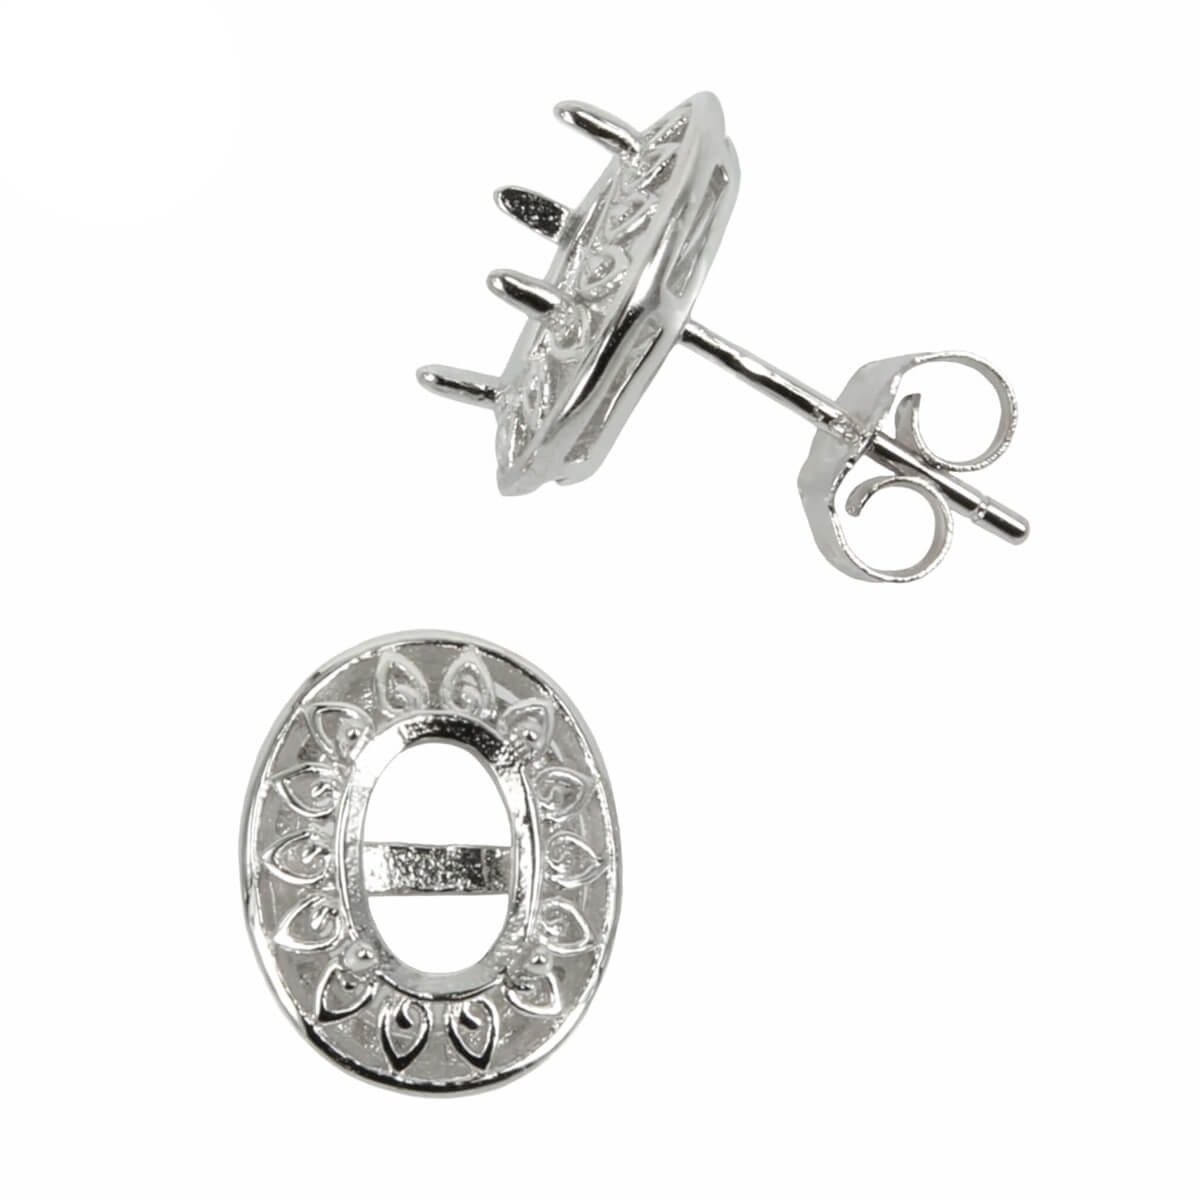 Filigree Border Stud Earrings with Oval Prong Mounting in Sterling Silver for 5x7mm Stones 